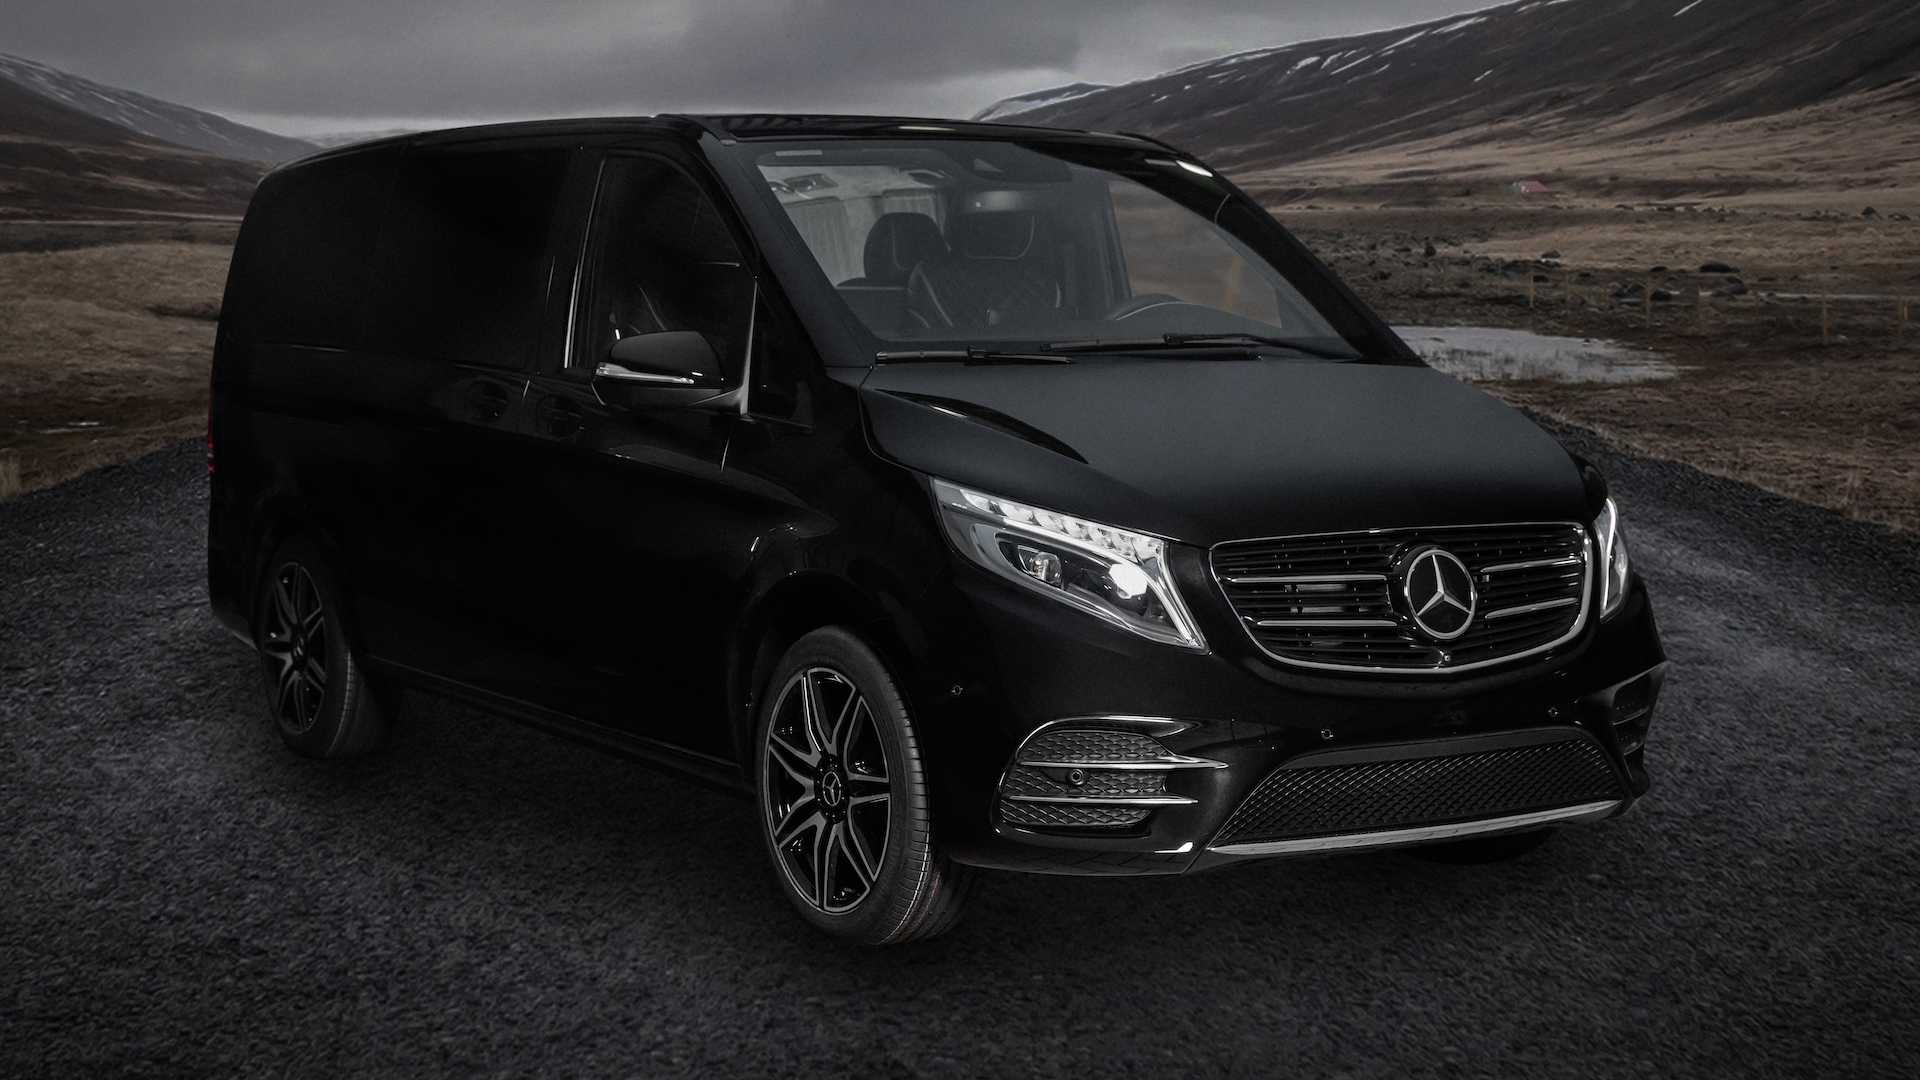 Load video: The Mercedes-Benz V-Class impresses at first glance – and after many thousands of kilometres. This applies to families, business people and hobby adventurers as well as shuttle passengers.